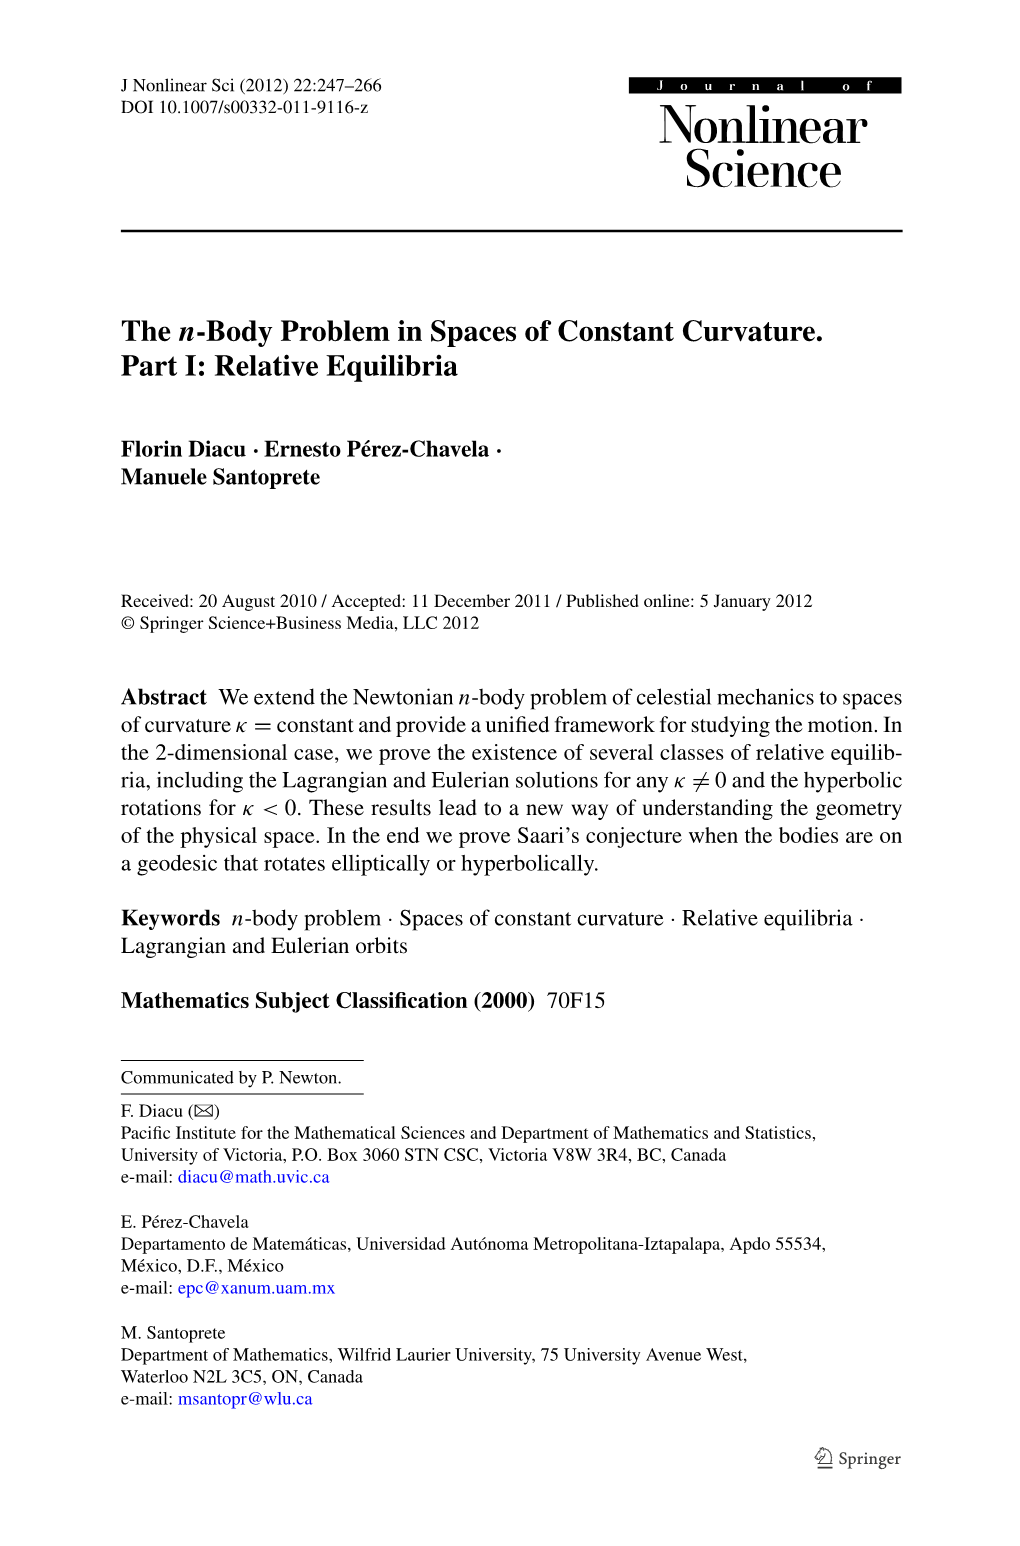 The N-Body Problem in Spaces of Constant Curvature. Part I: Relative Equilibria